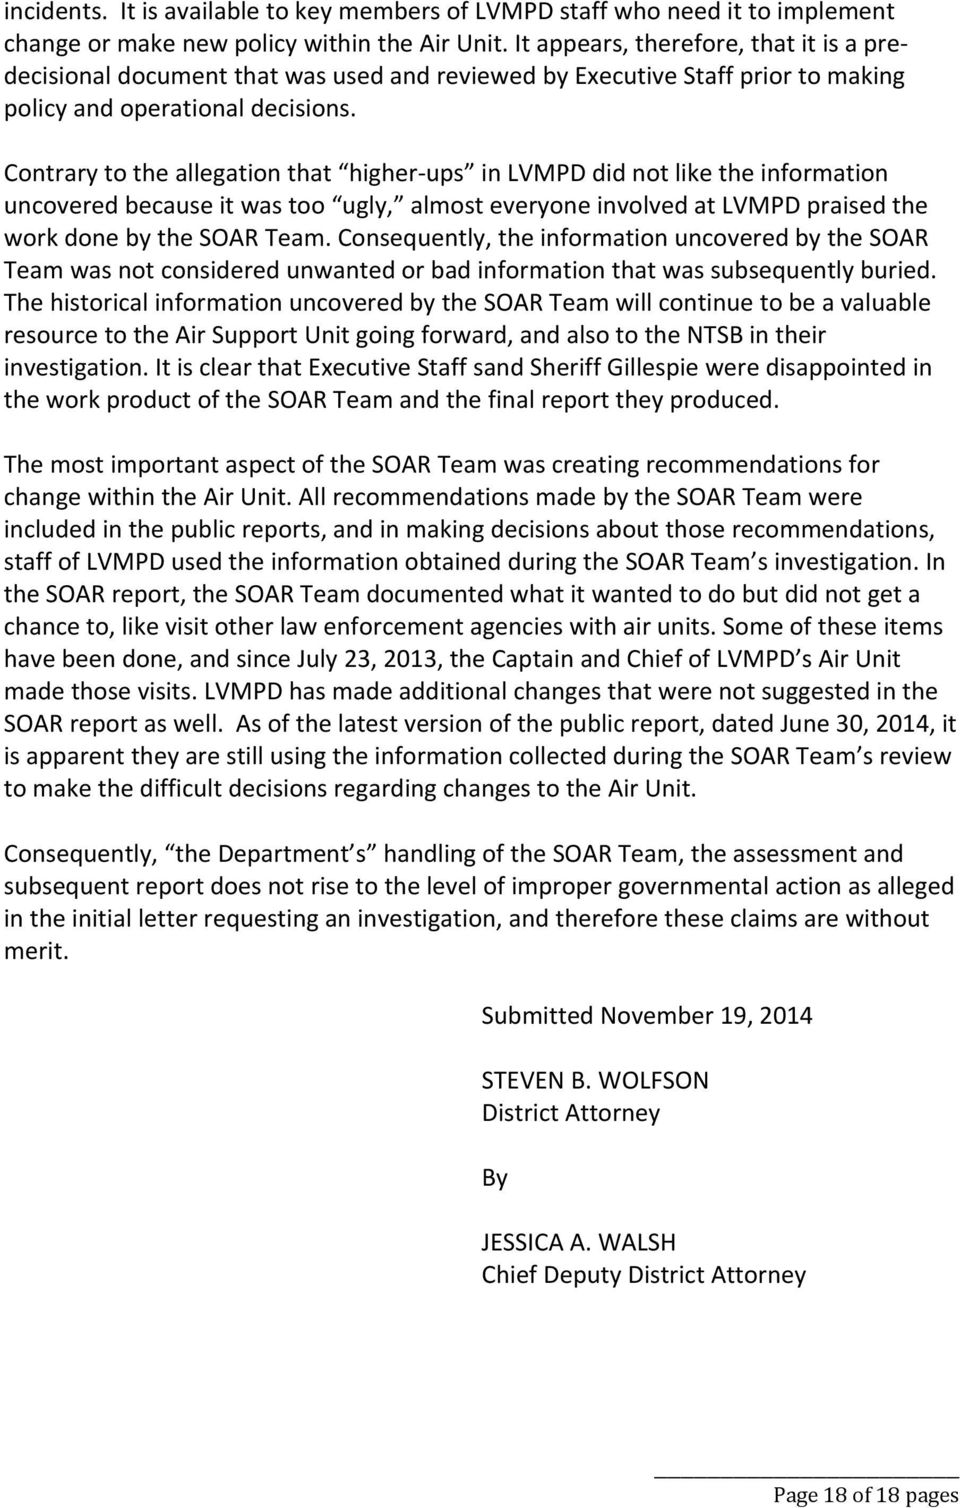 Contrary to the allegation that higher ups in LVMPD did not like the information uncovered because it was too ugly, almost everyone involved at LVMPD praised the work done by the SOAR Team.